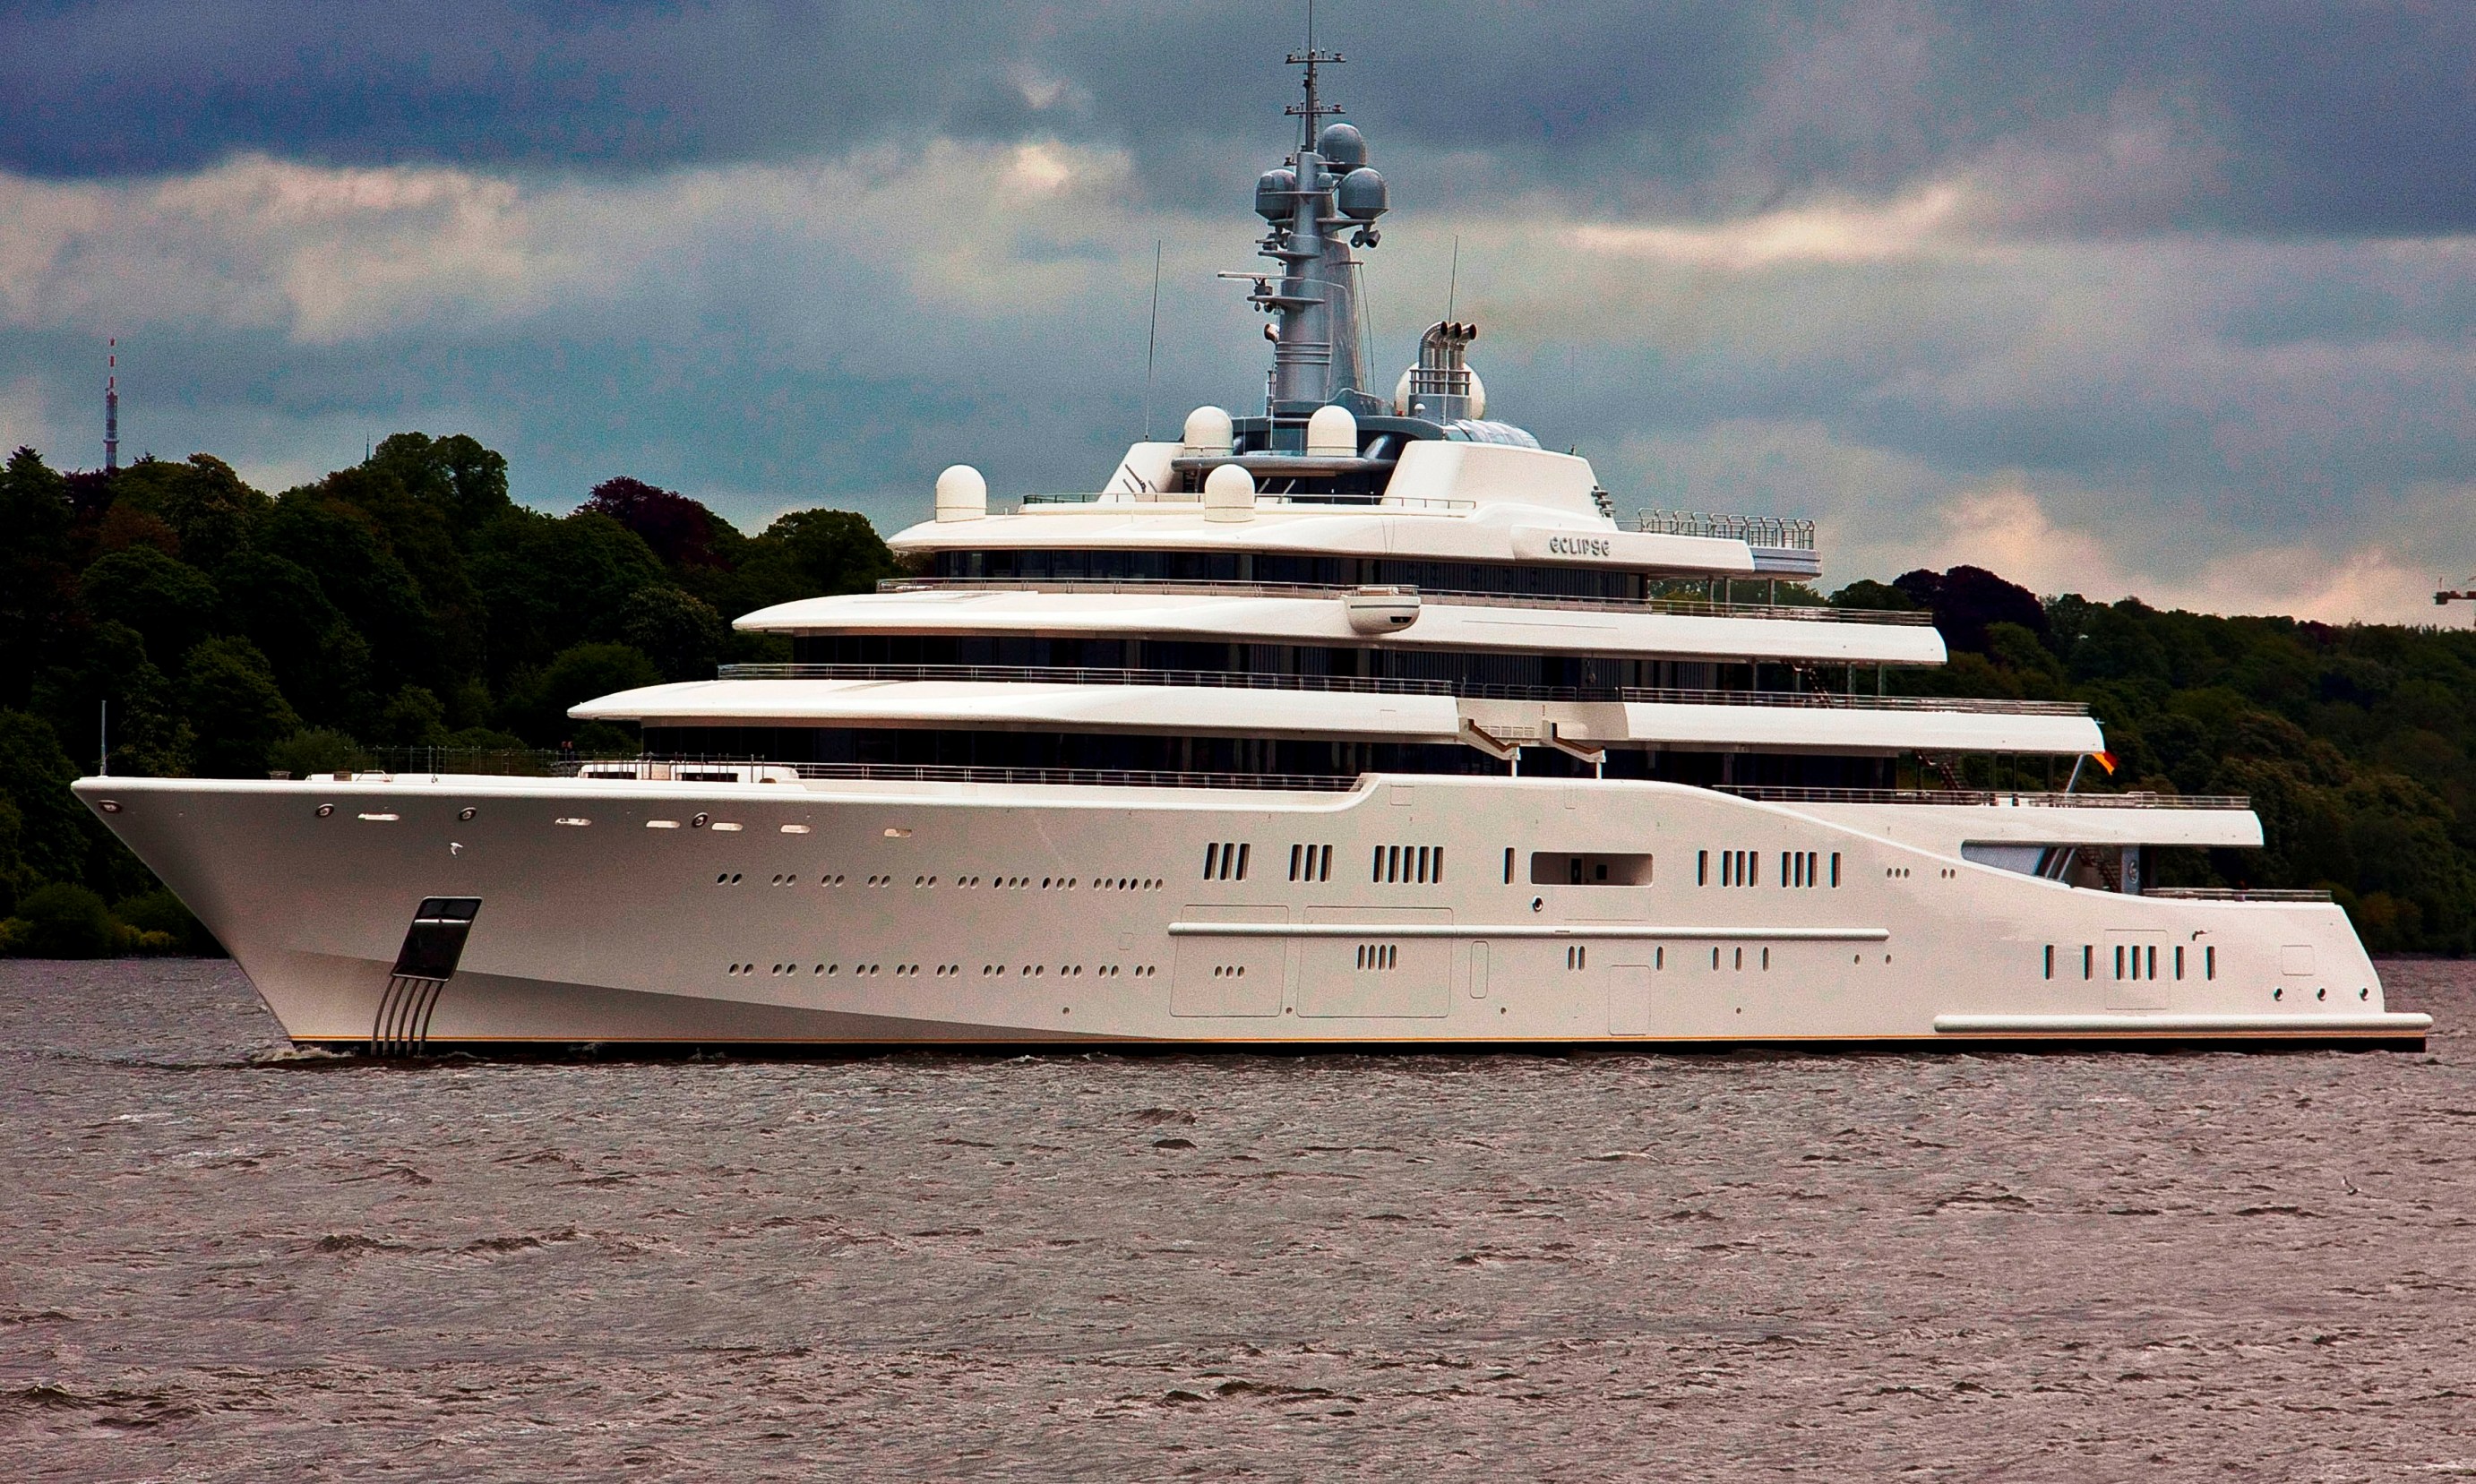 biggest yachts in the uk